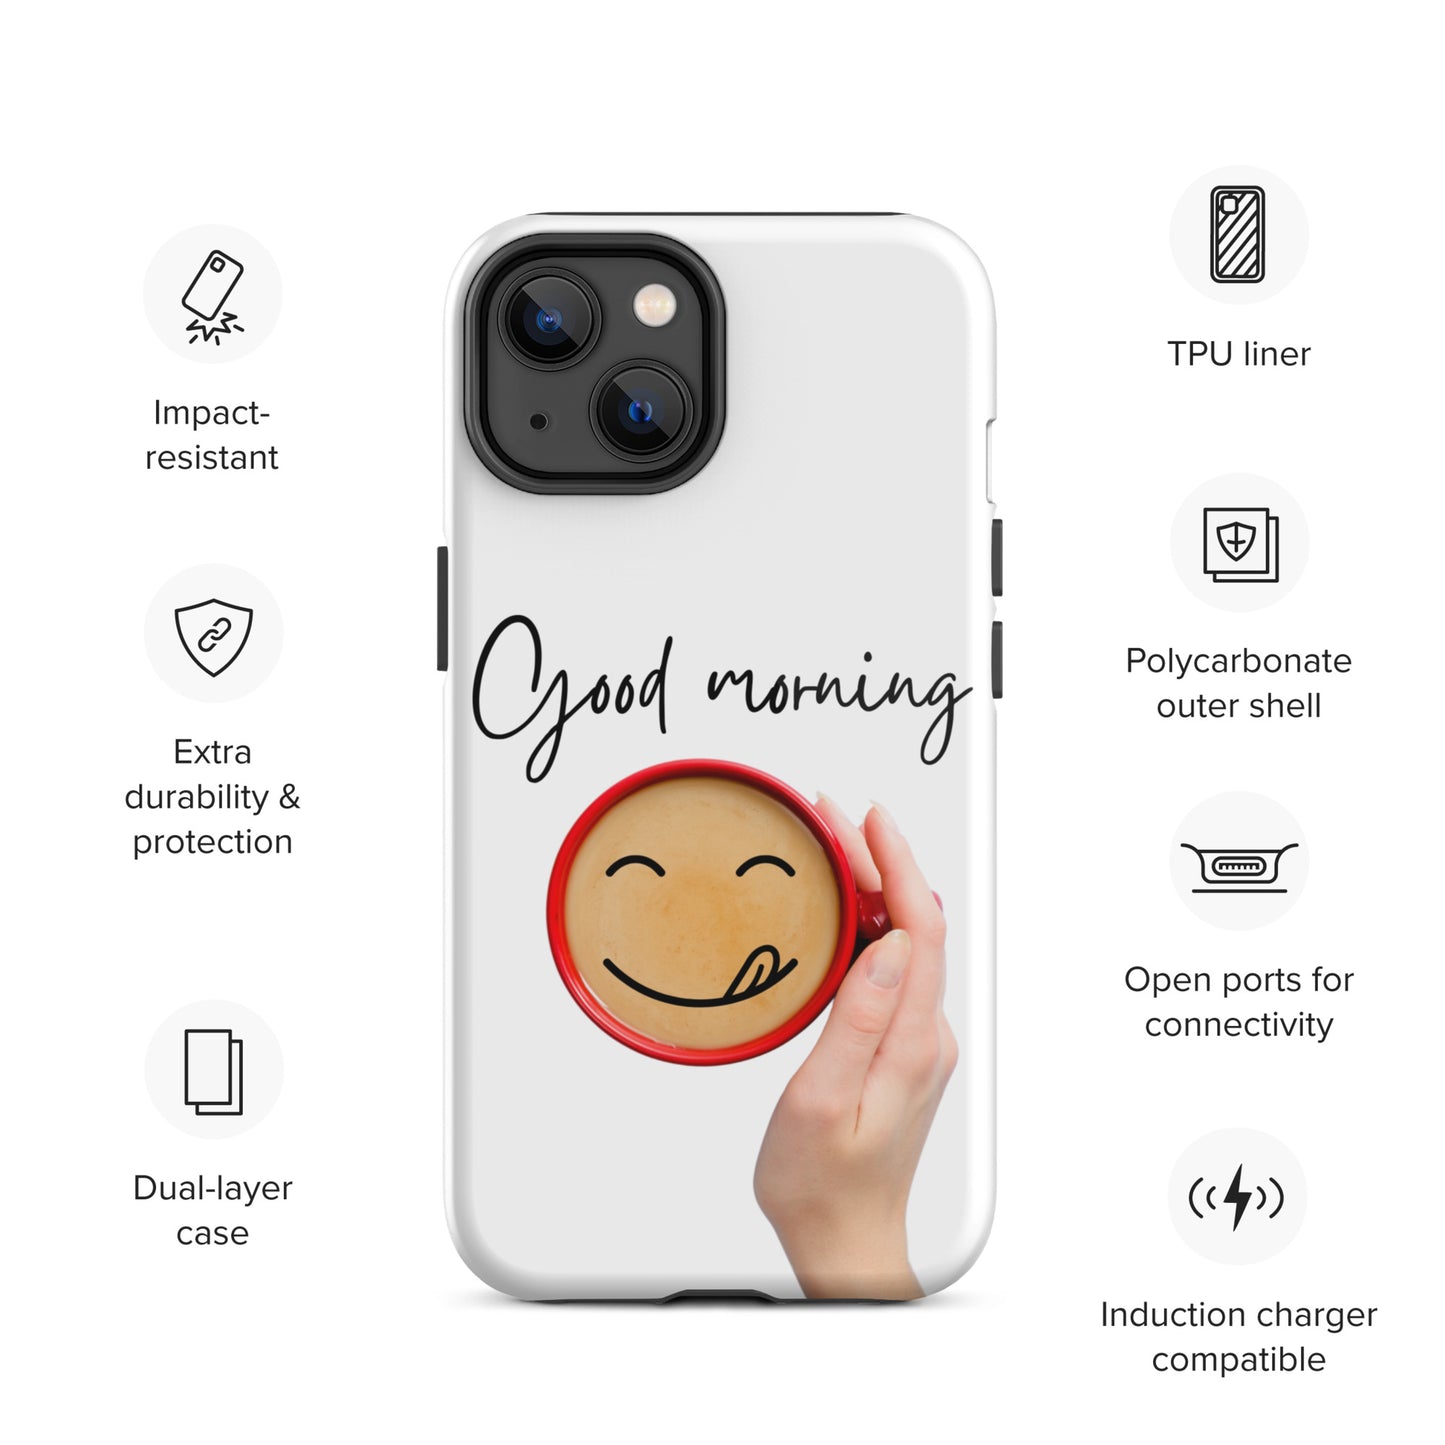 Tough iPhone Case (for iPhone 11-14: standard, pro and max)